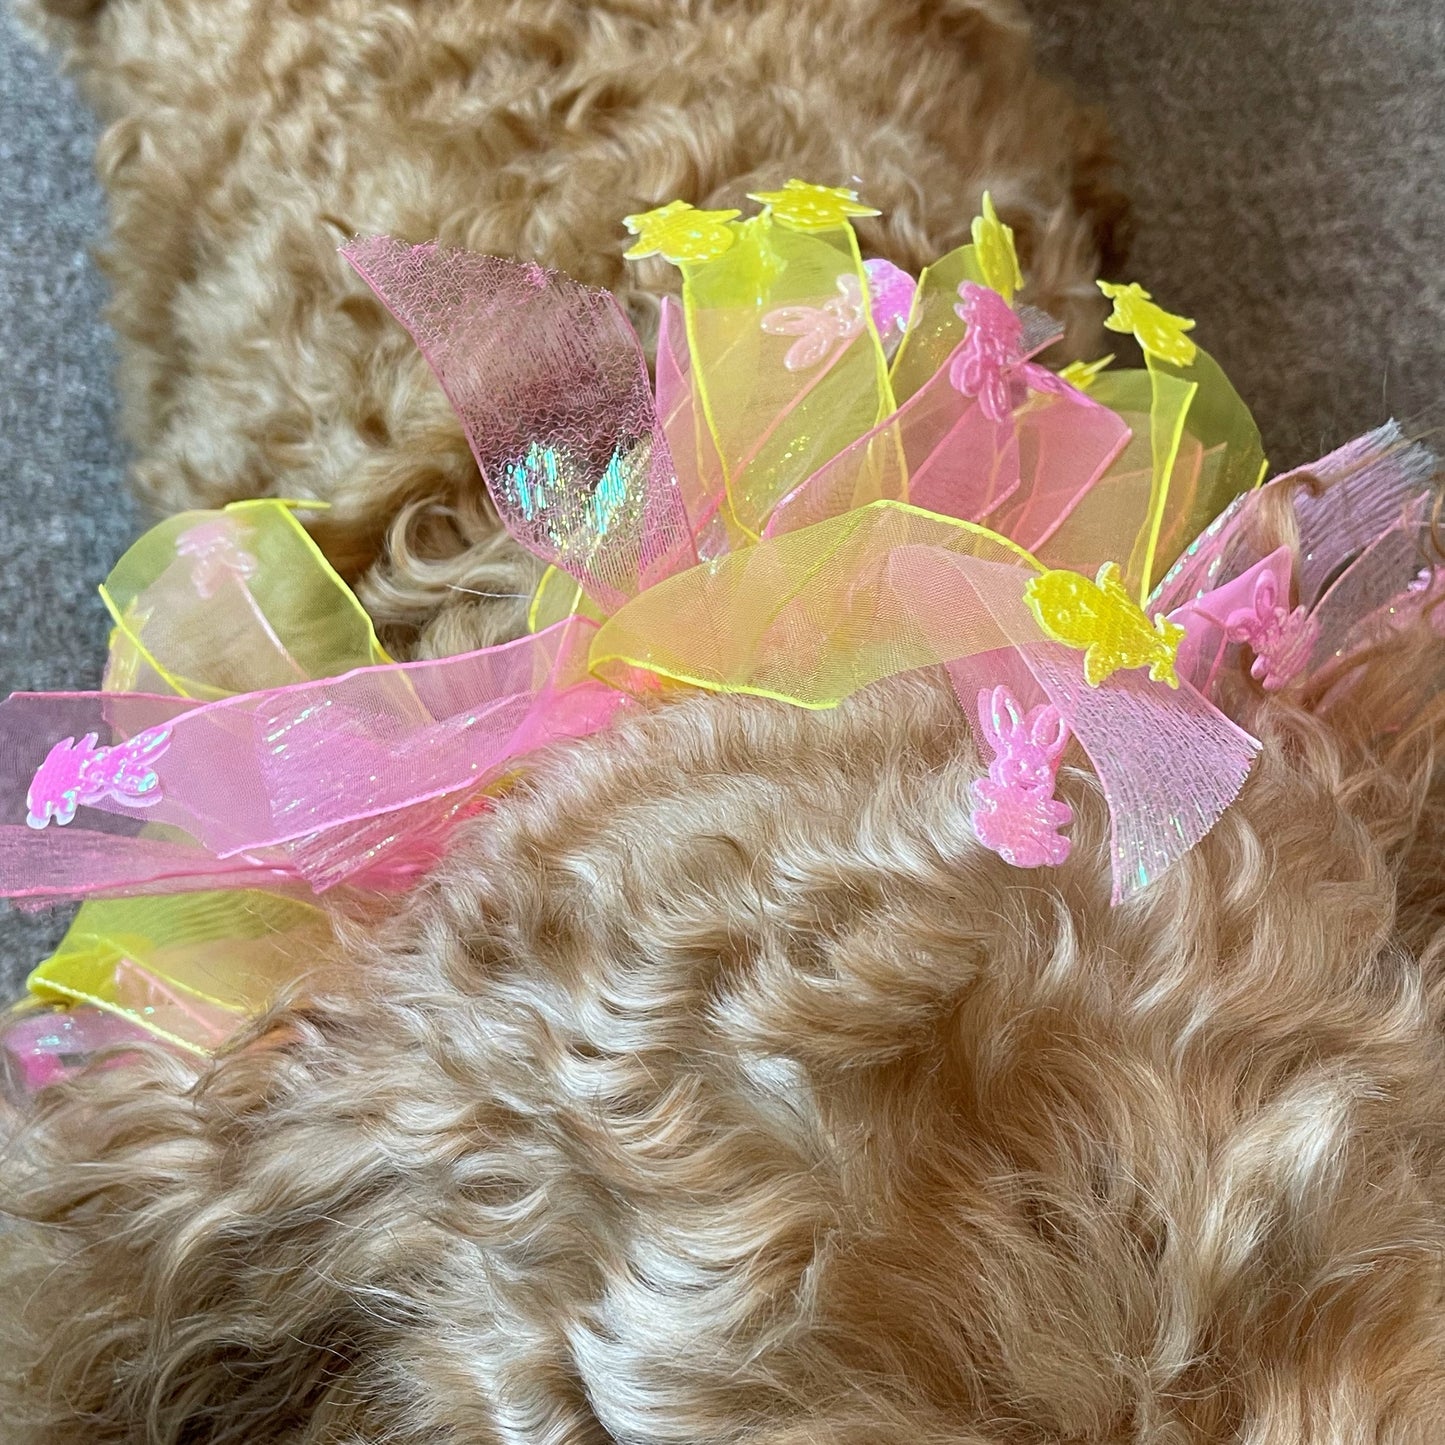 Sparkling Bunny and Chick Frill Dog Festivities Collar | Great for Photo shoots